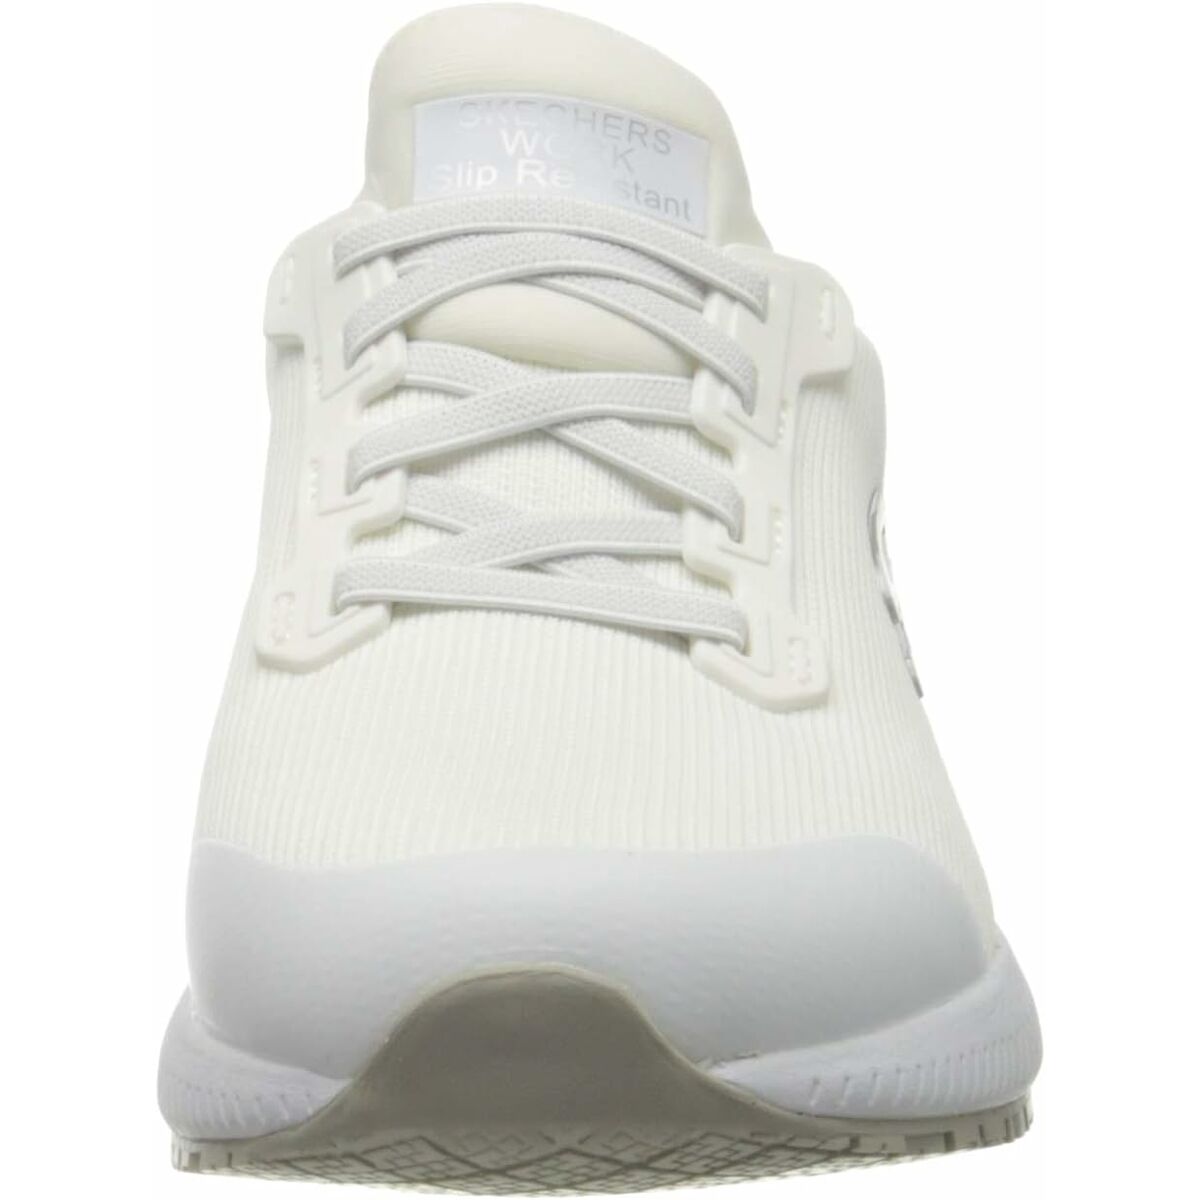 Sports Trainers for Women Skechers SQUAD White